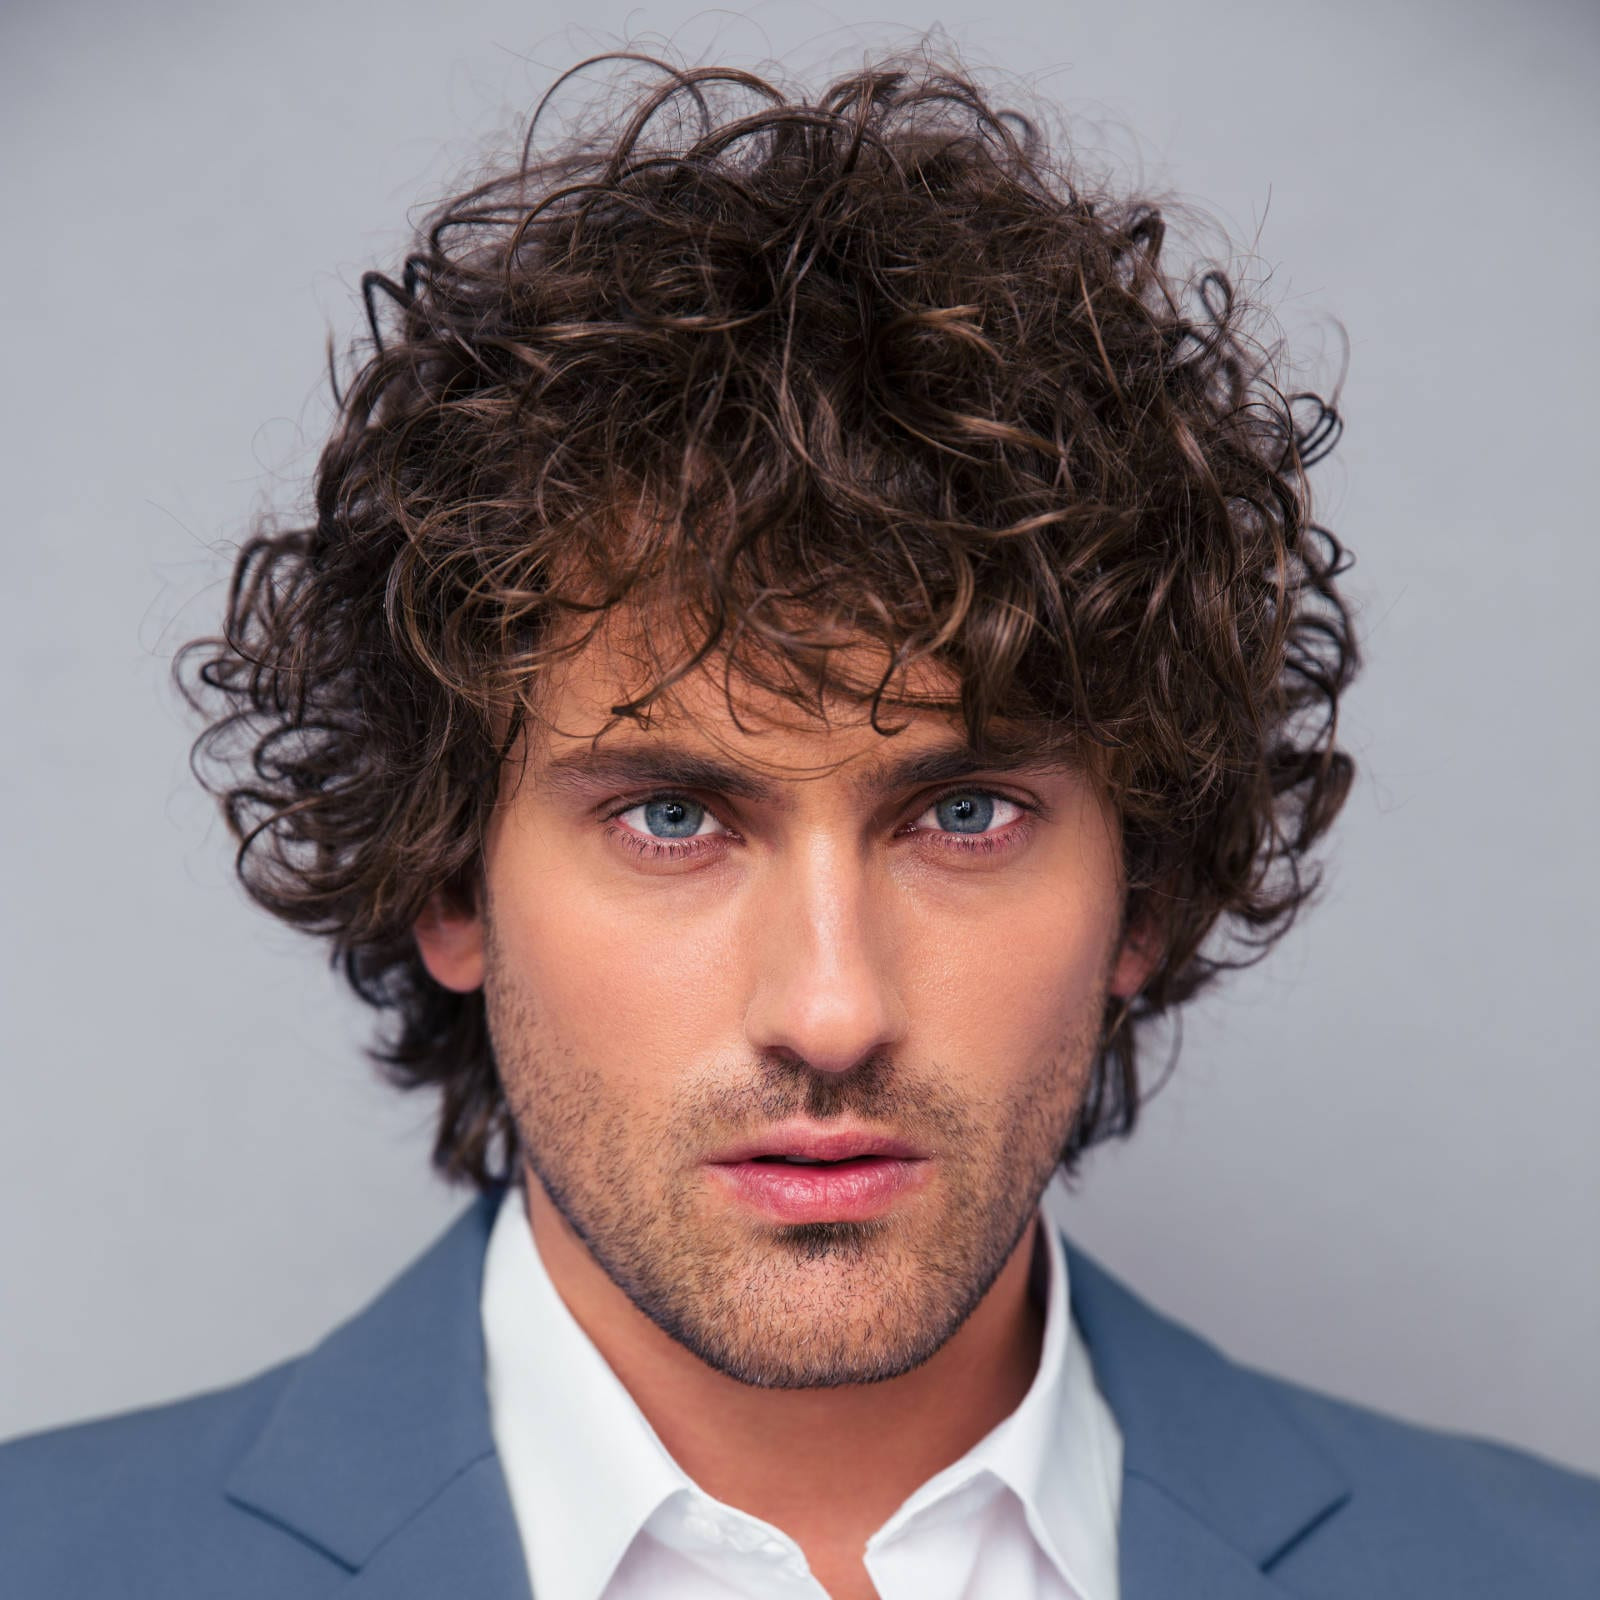 Men Curly Hairstyles
 40 Modern Men s Hairstyles for Curly Hair That Will